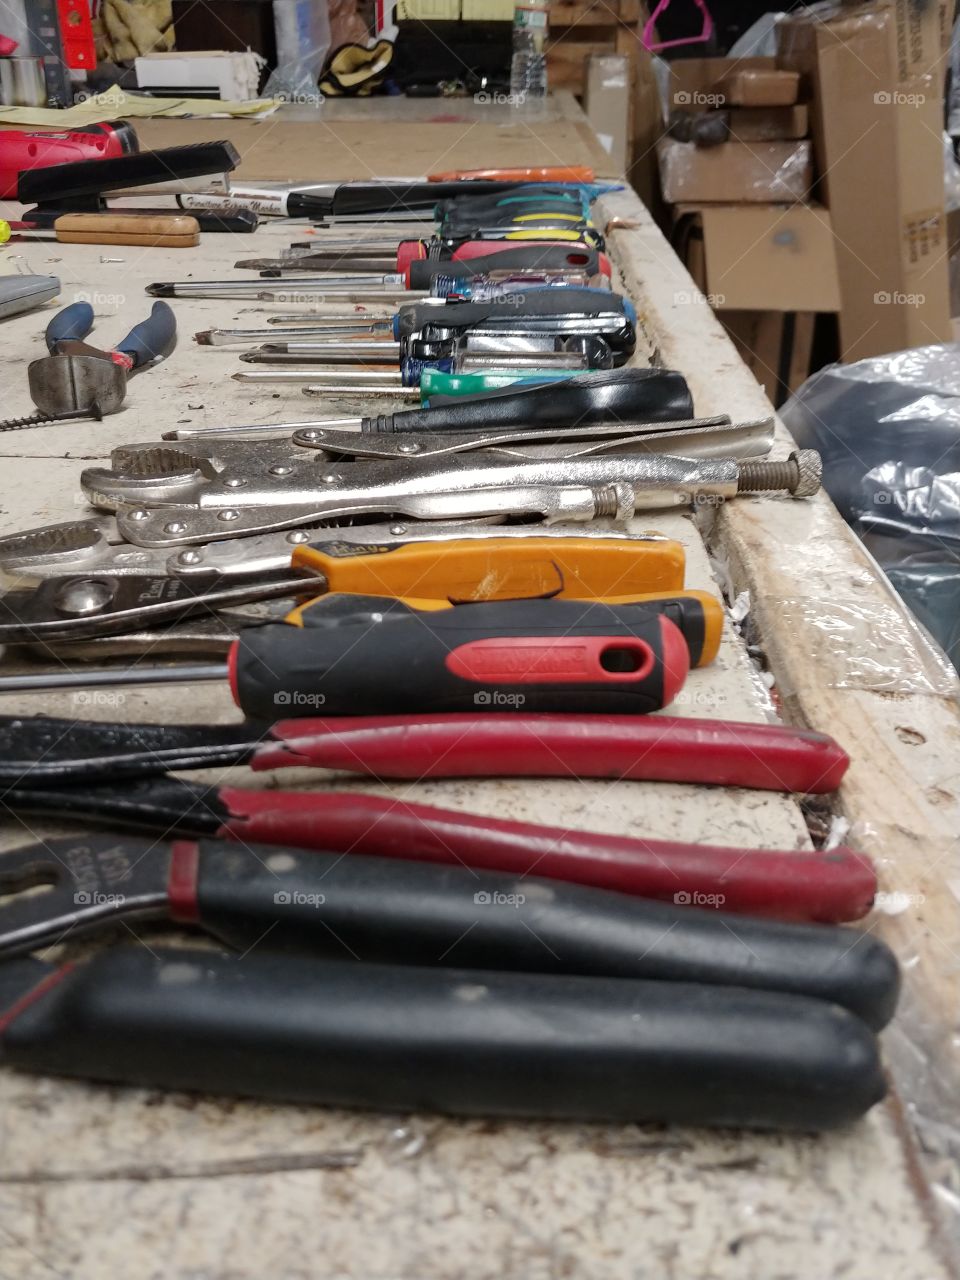 my boss used to keep his tools just like this. that made it easy to find them, easy to use them, and easy to put them away. i miss him and that job.